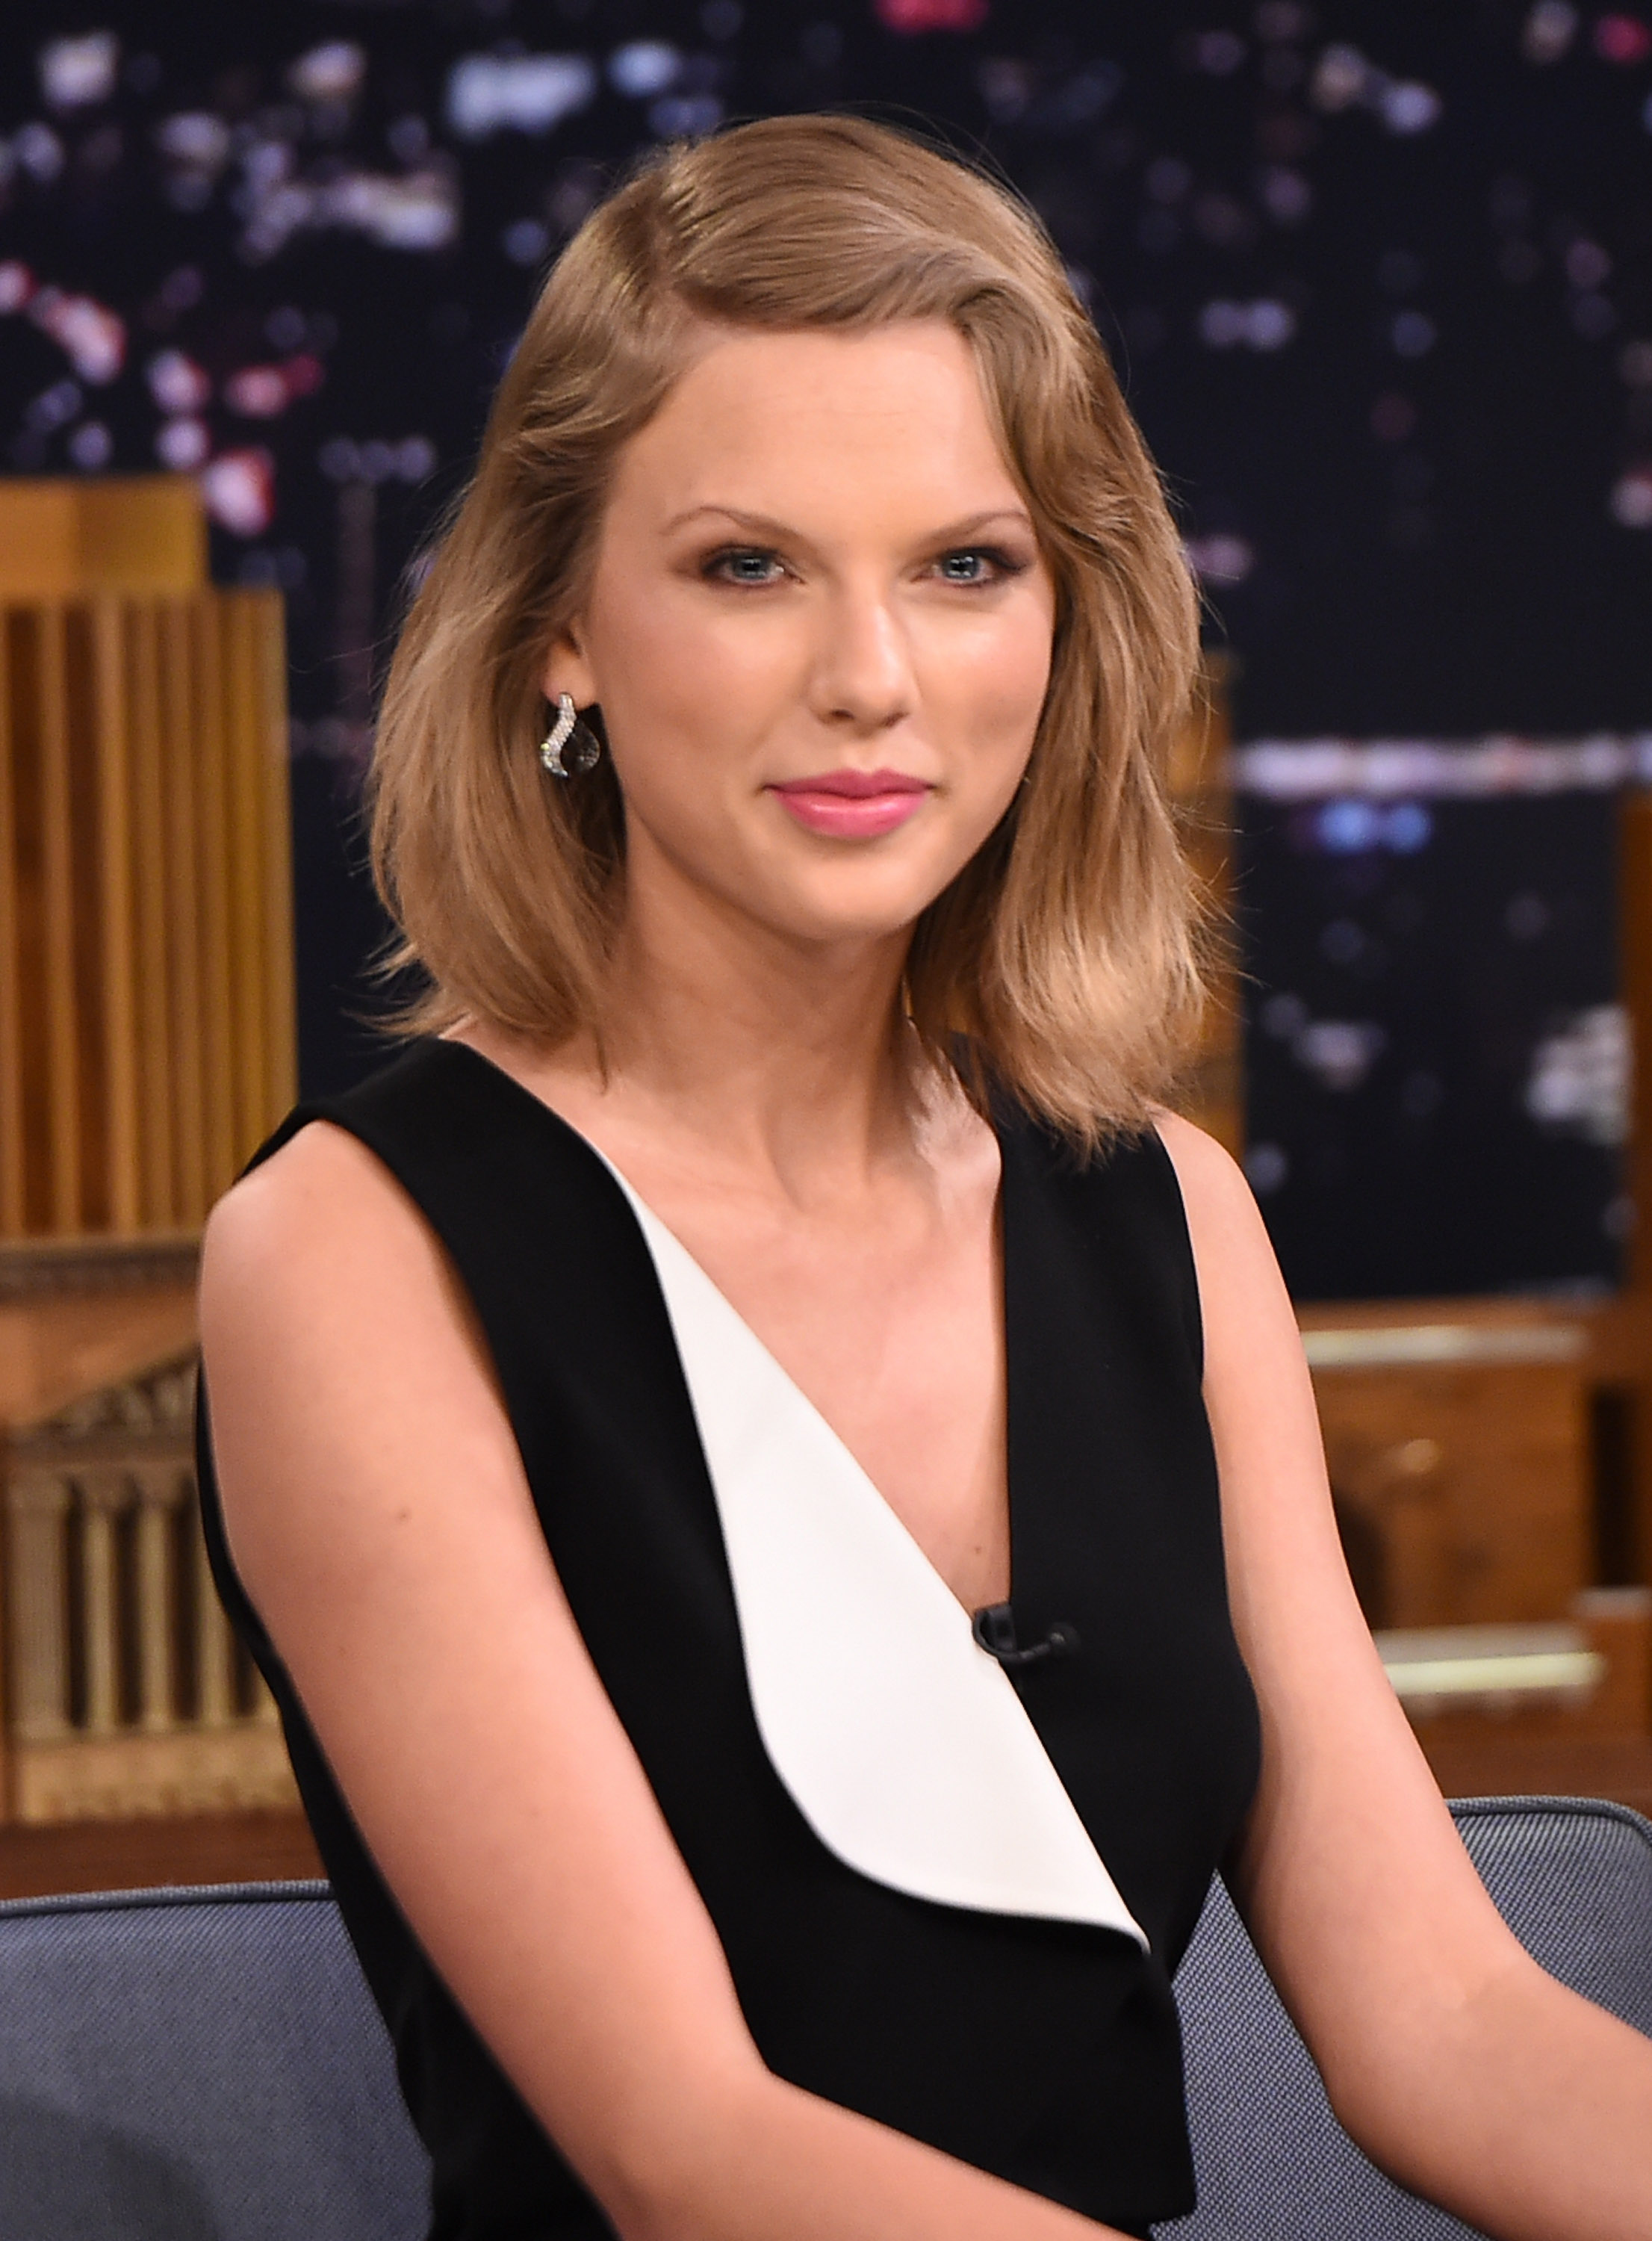 Taylor Swift visits "The Tonight Show Starring Jimmy Fallon" in New York City on Feb. 17, 2015. (Theo Wargo/NBC—Getty Images)